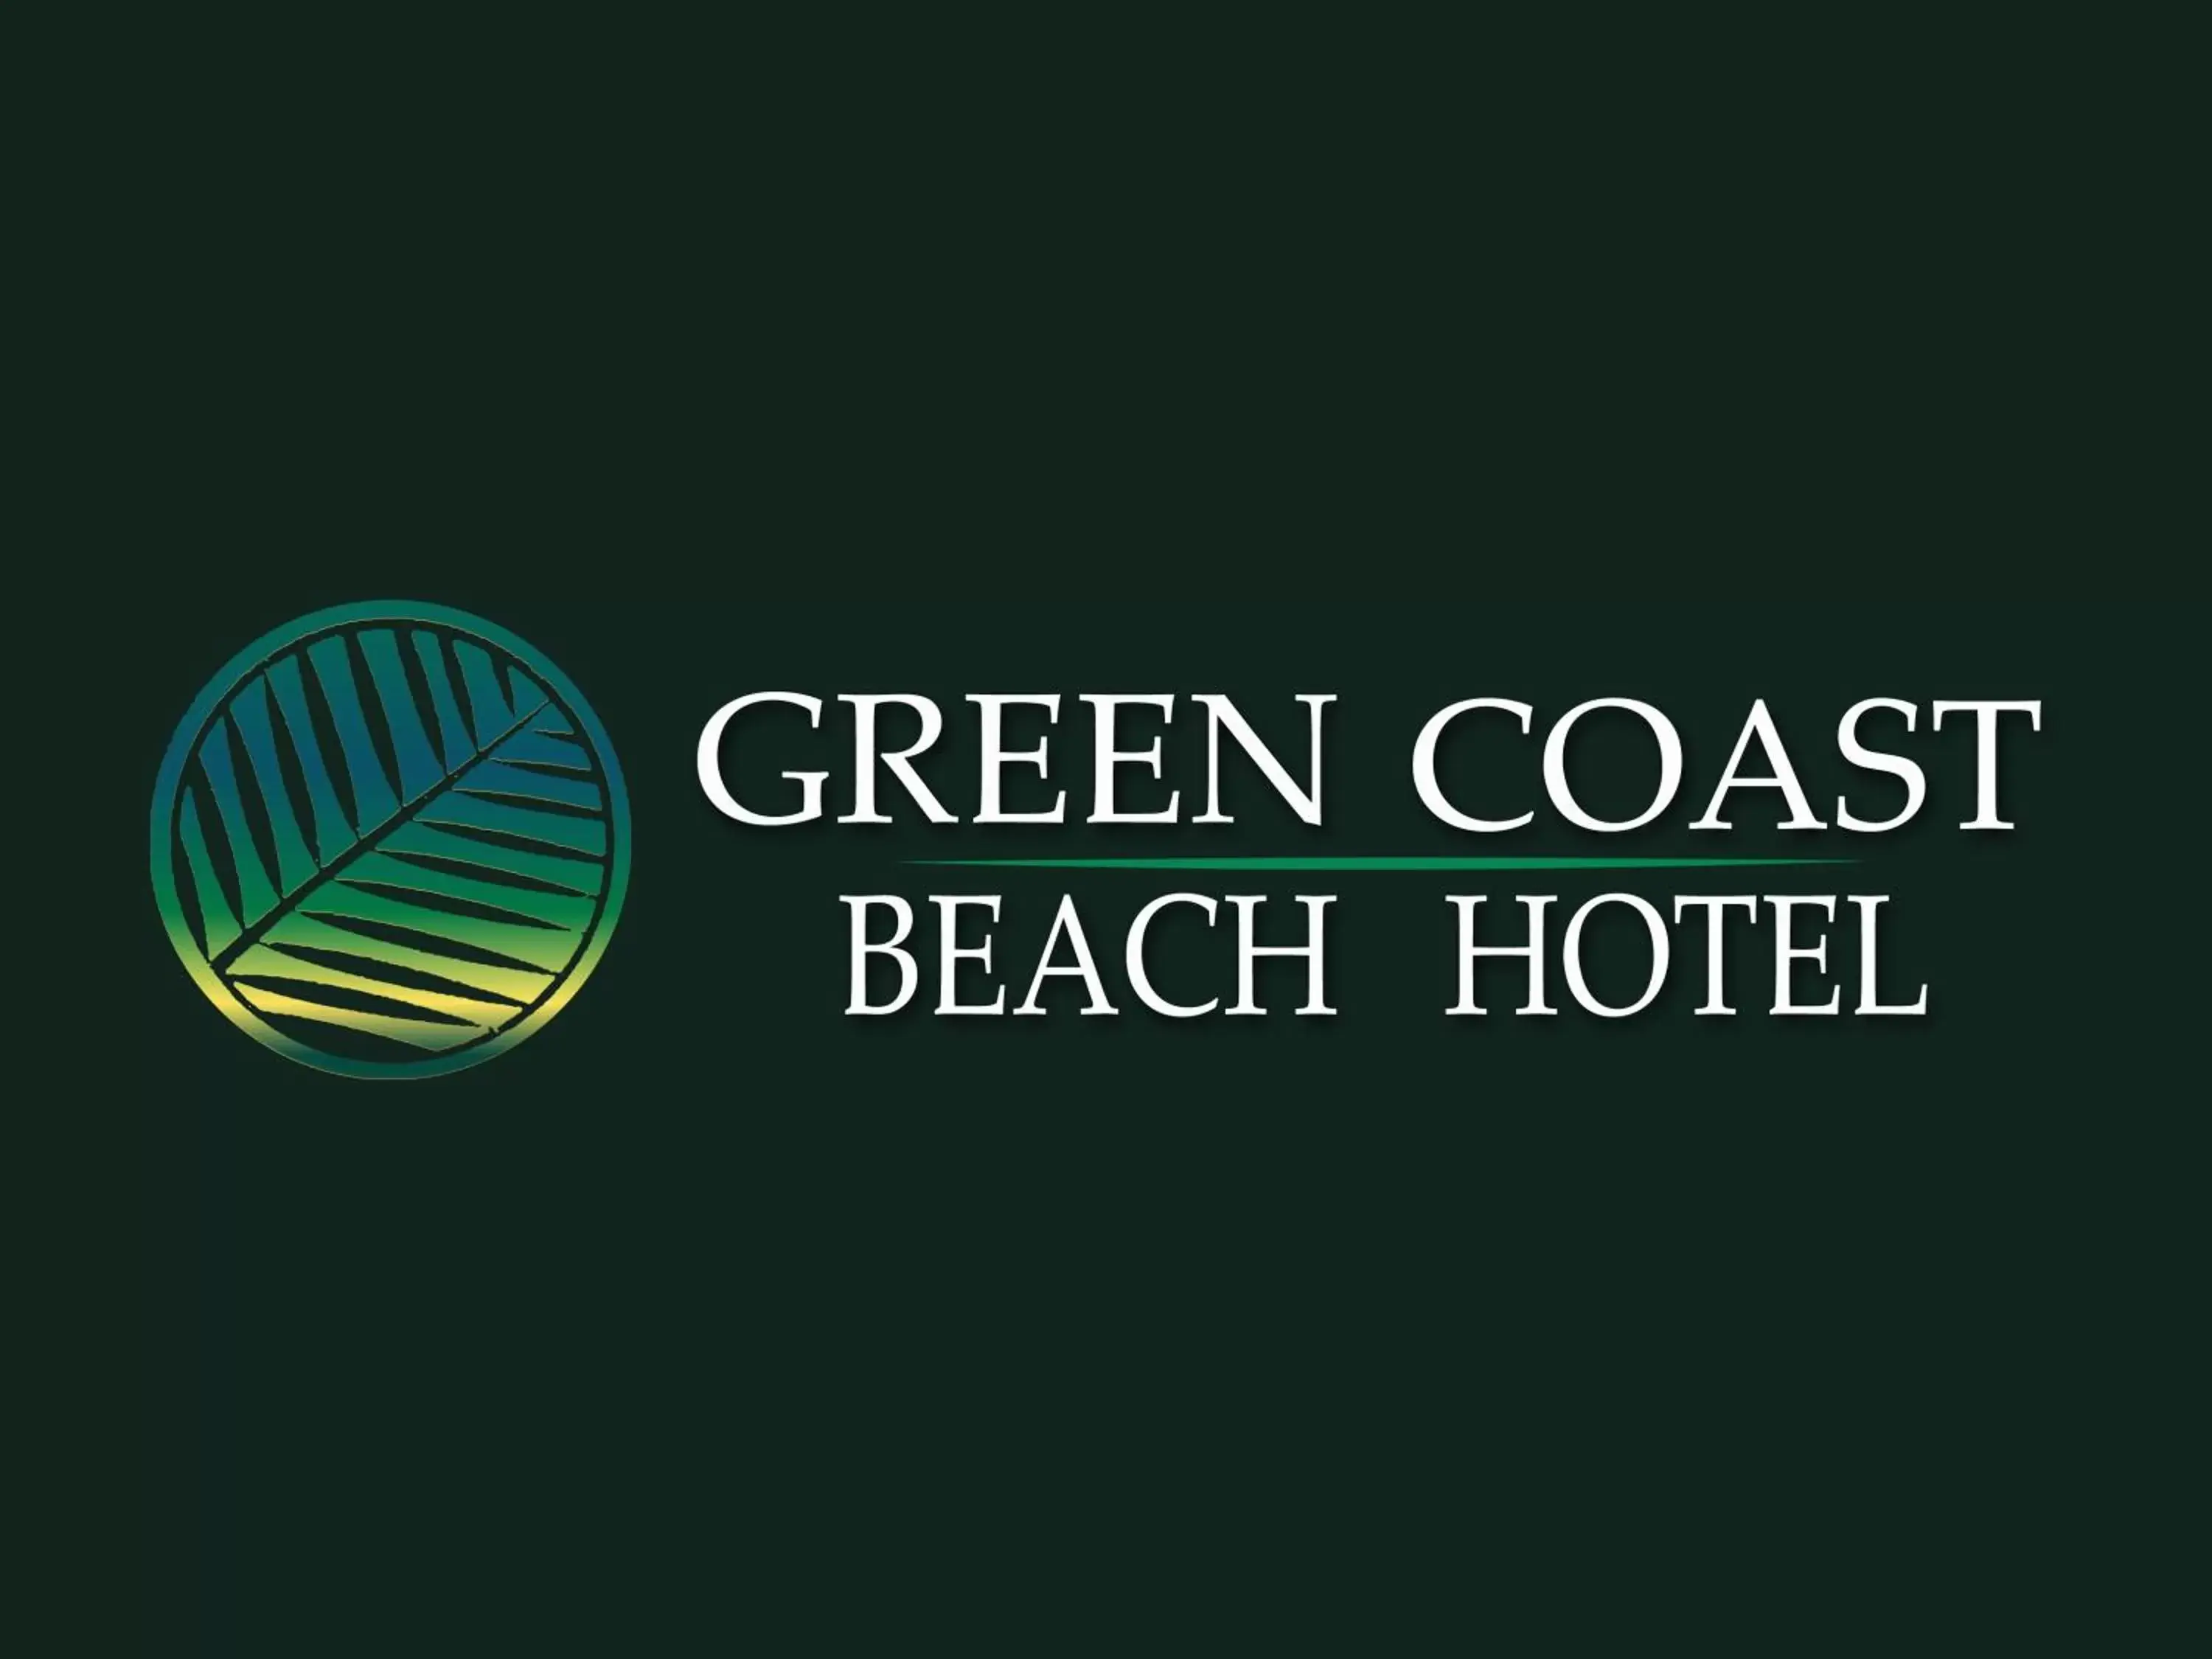 Property logo or sign, Property Logo/Sign in Green Coast Beach Hotel